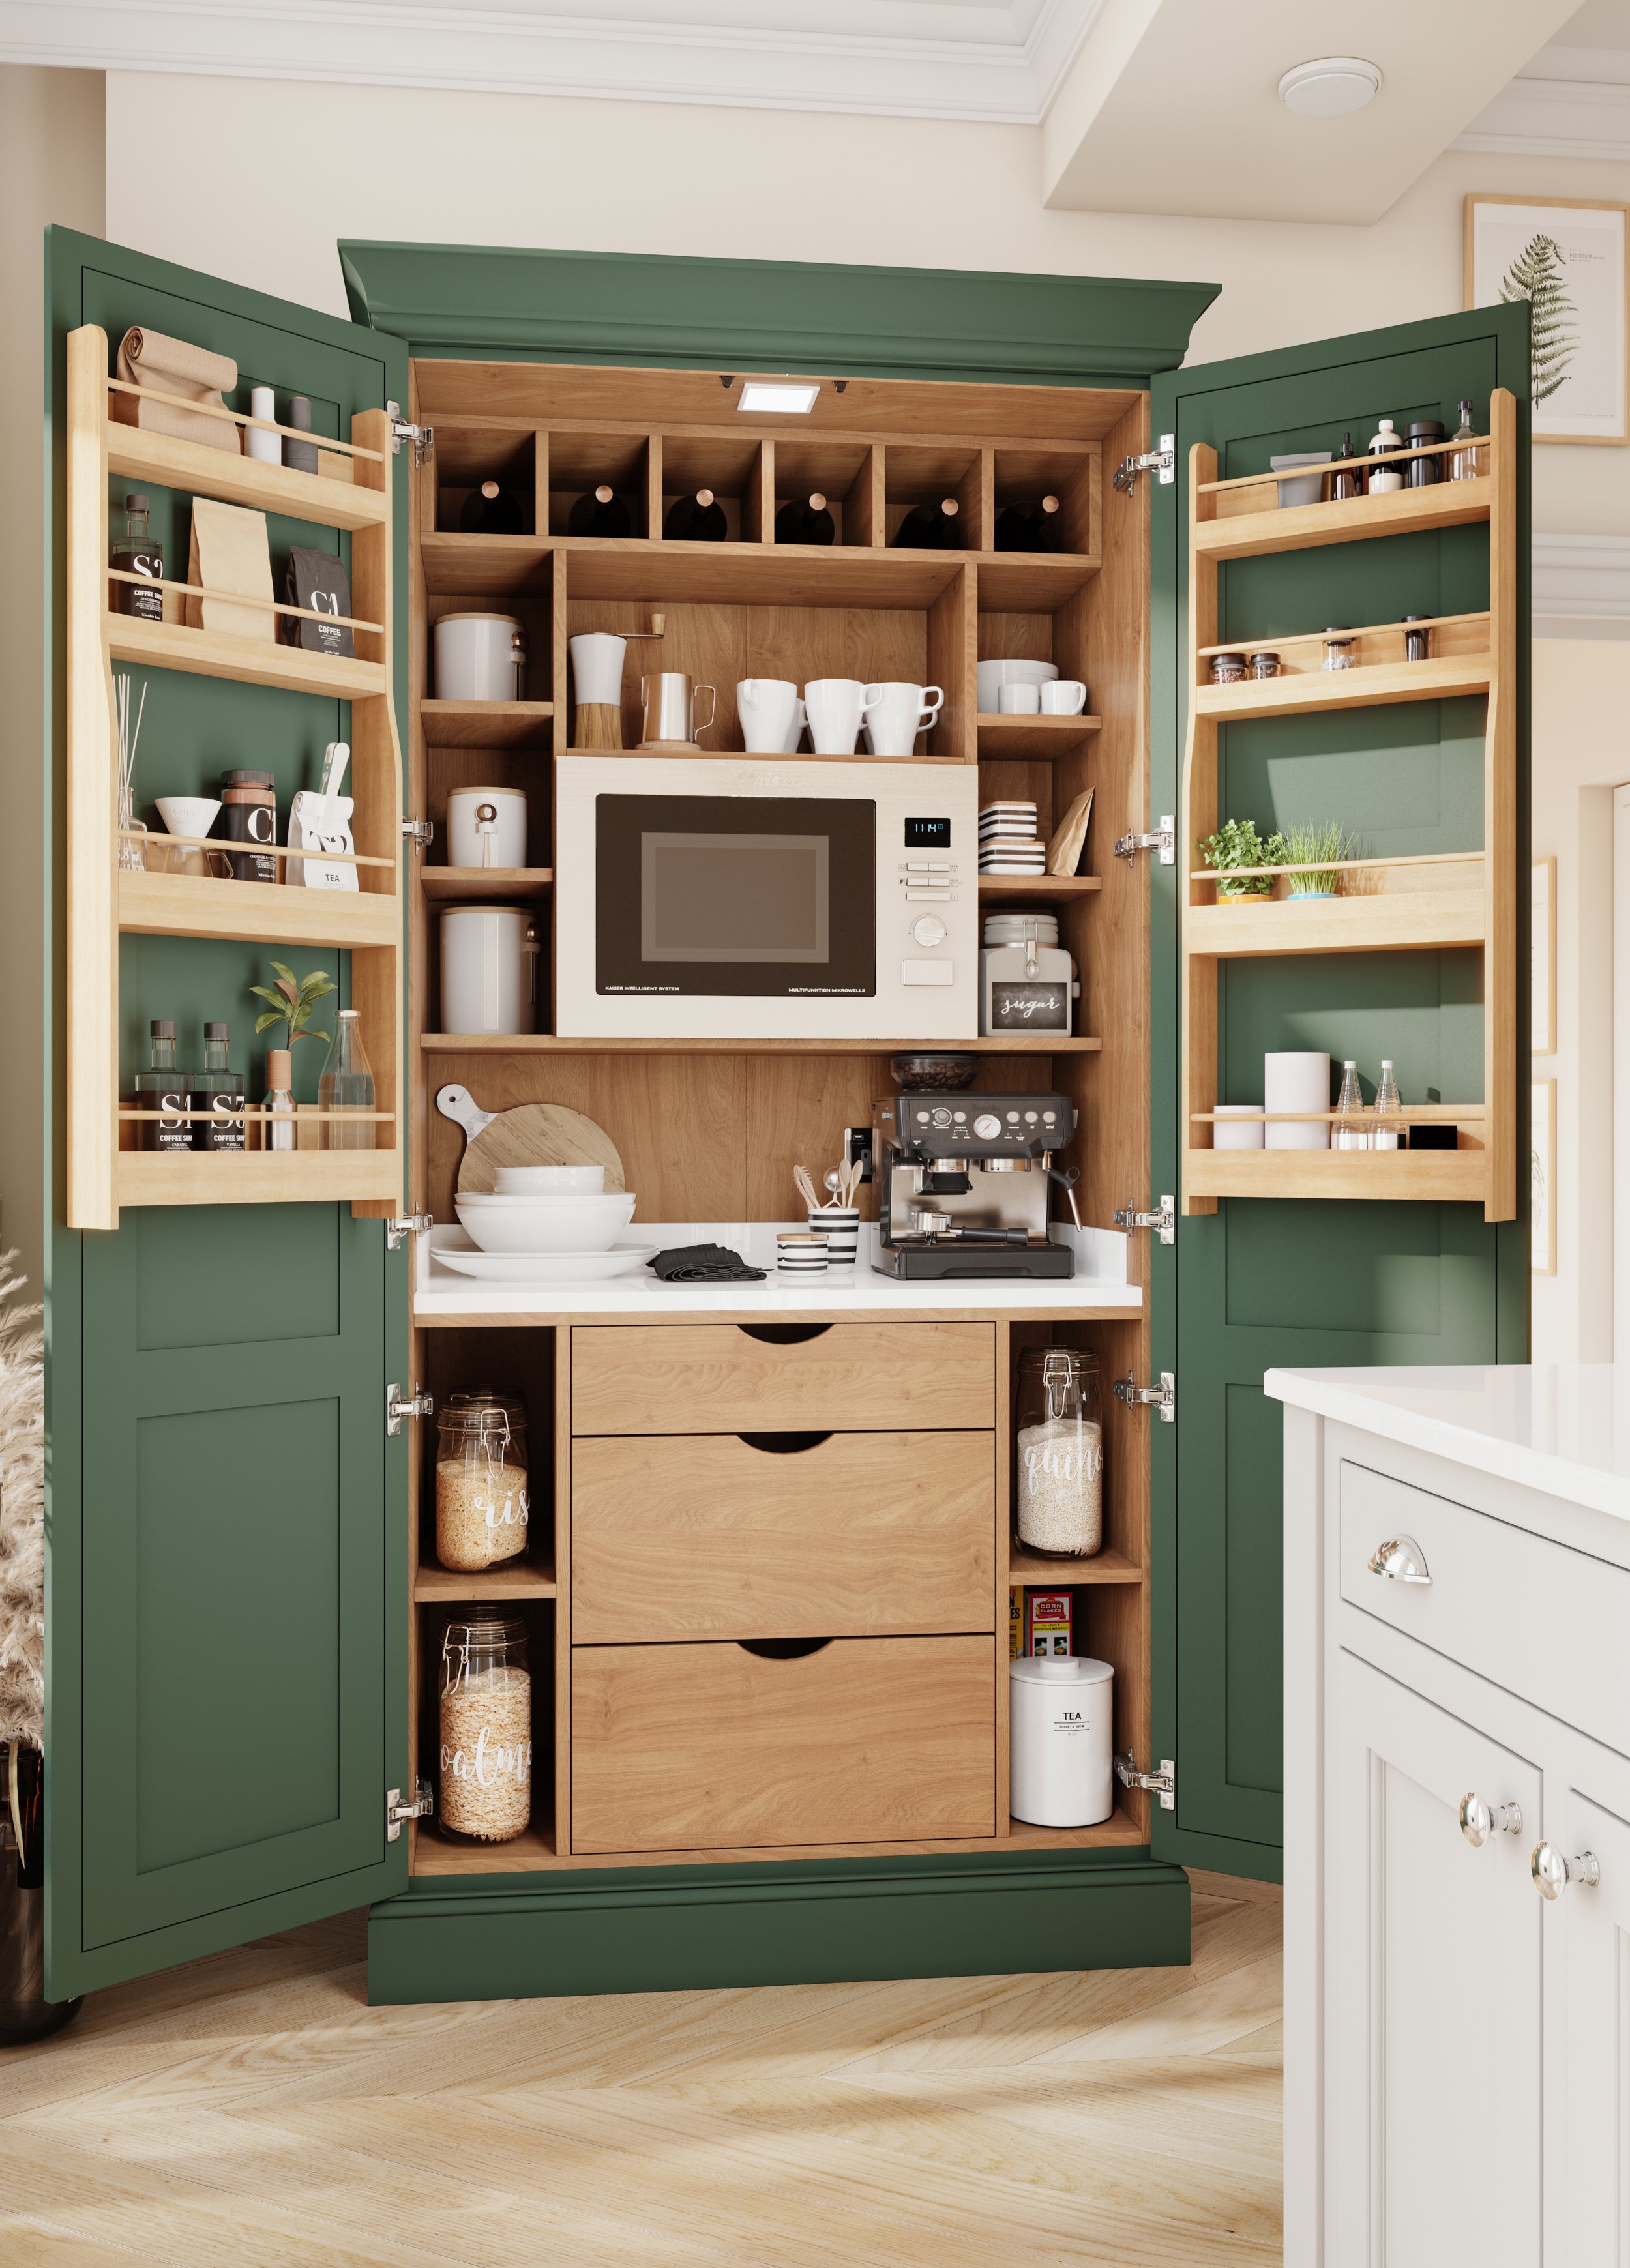 Clutter With Our Kitchen Storage Ideas